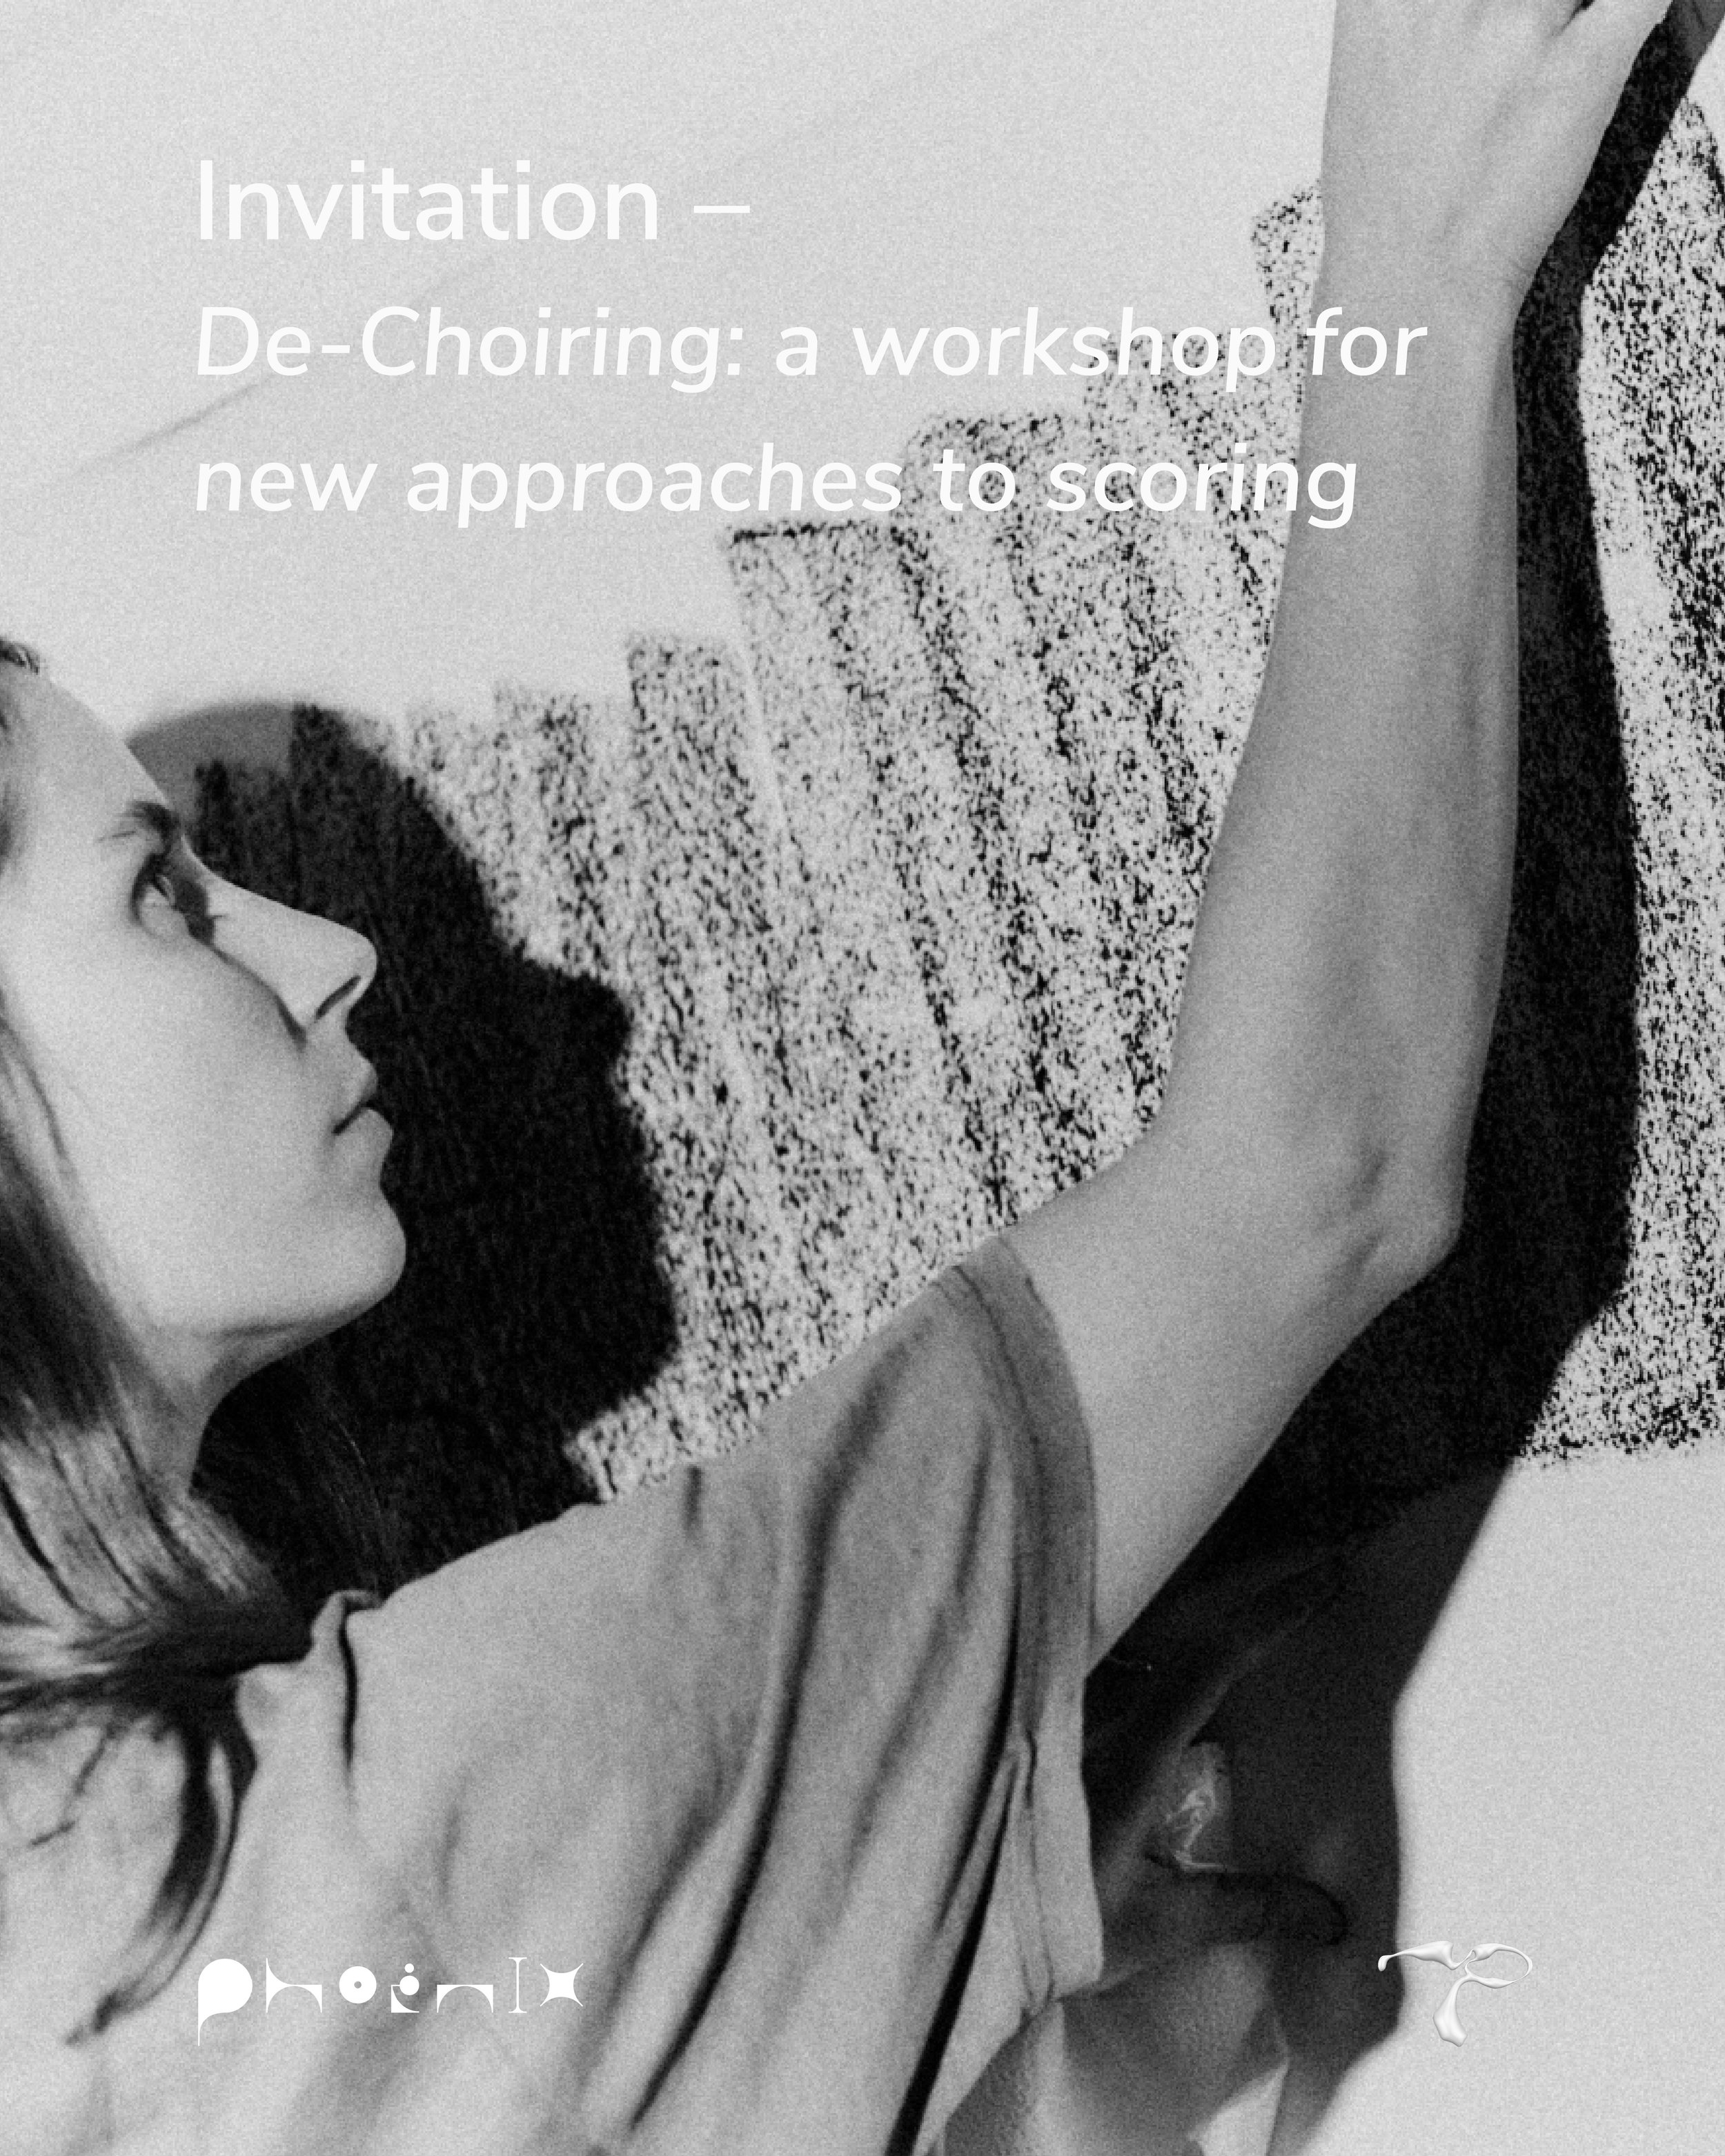 De-Choiring: a workshop for new approaches to scoring — Megan Alice Clune, Nicole Pingon, Chanel Tobler, and Mara Schwerdtfeger